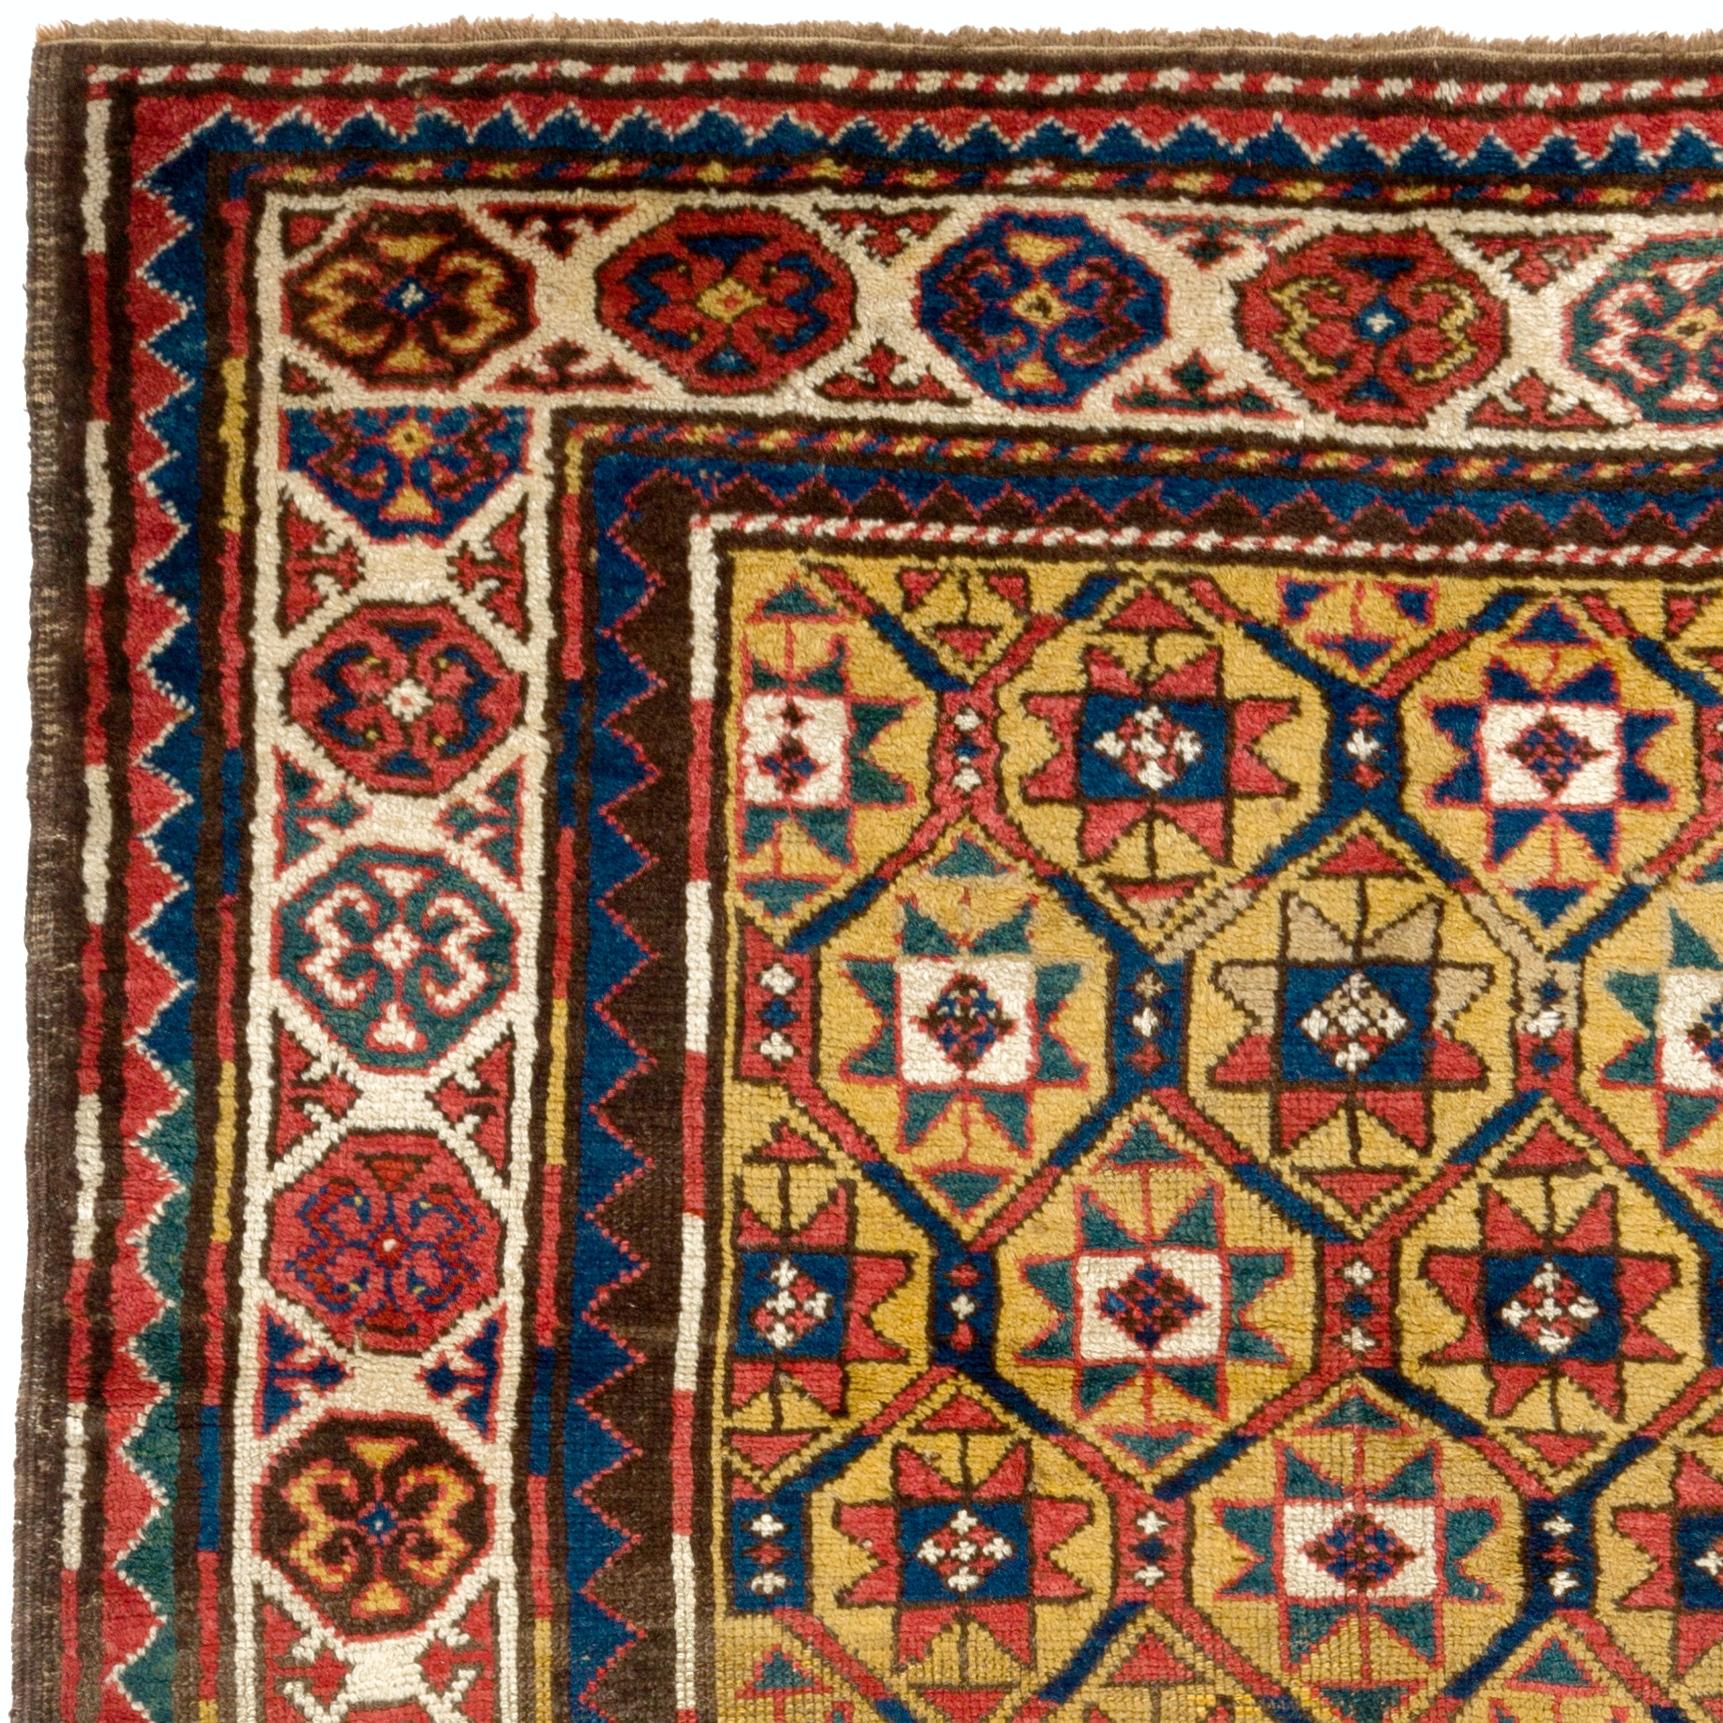 A gorgeous antique Kazak rug from the late 19th century with a sought-after goldenrod yellow field, featuring a pattern of all-over latticed pinwheels, surrounded by a large inner border filled with ram’s horns with inner and outer guard strips